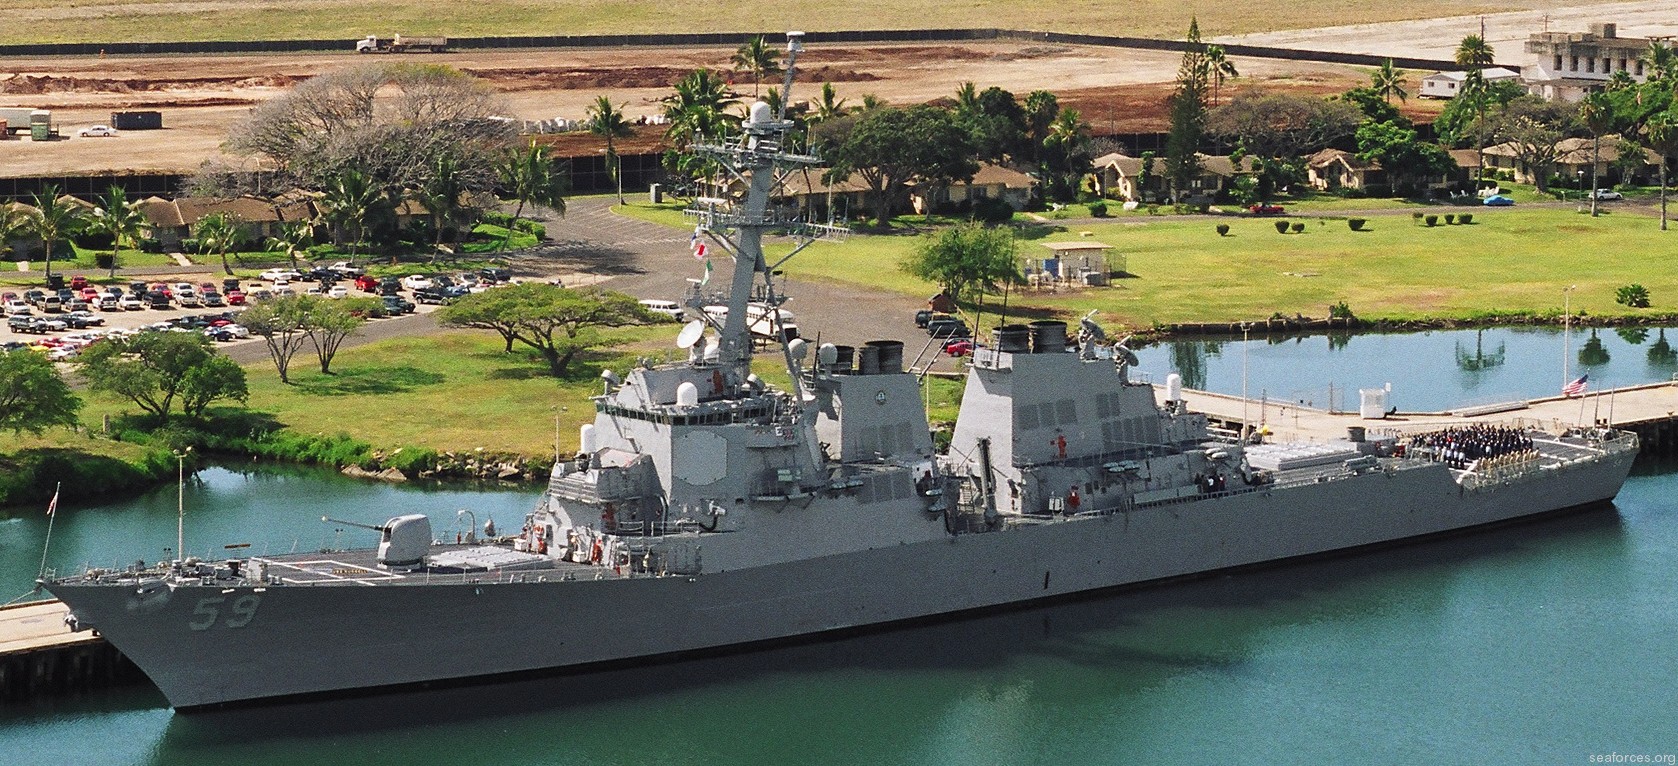 ddg-59 uss russell guided missile destroyer us navy 50